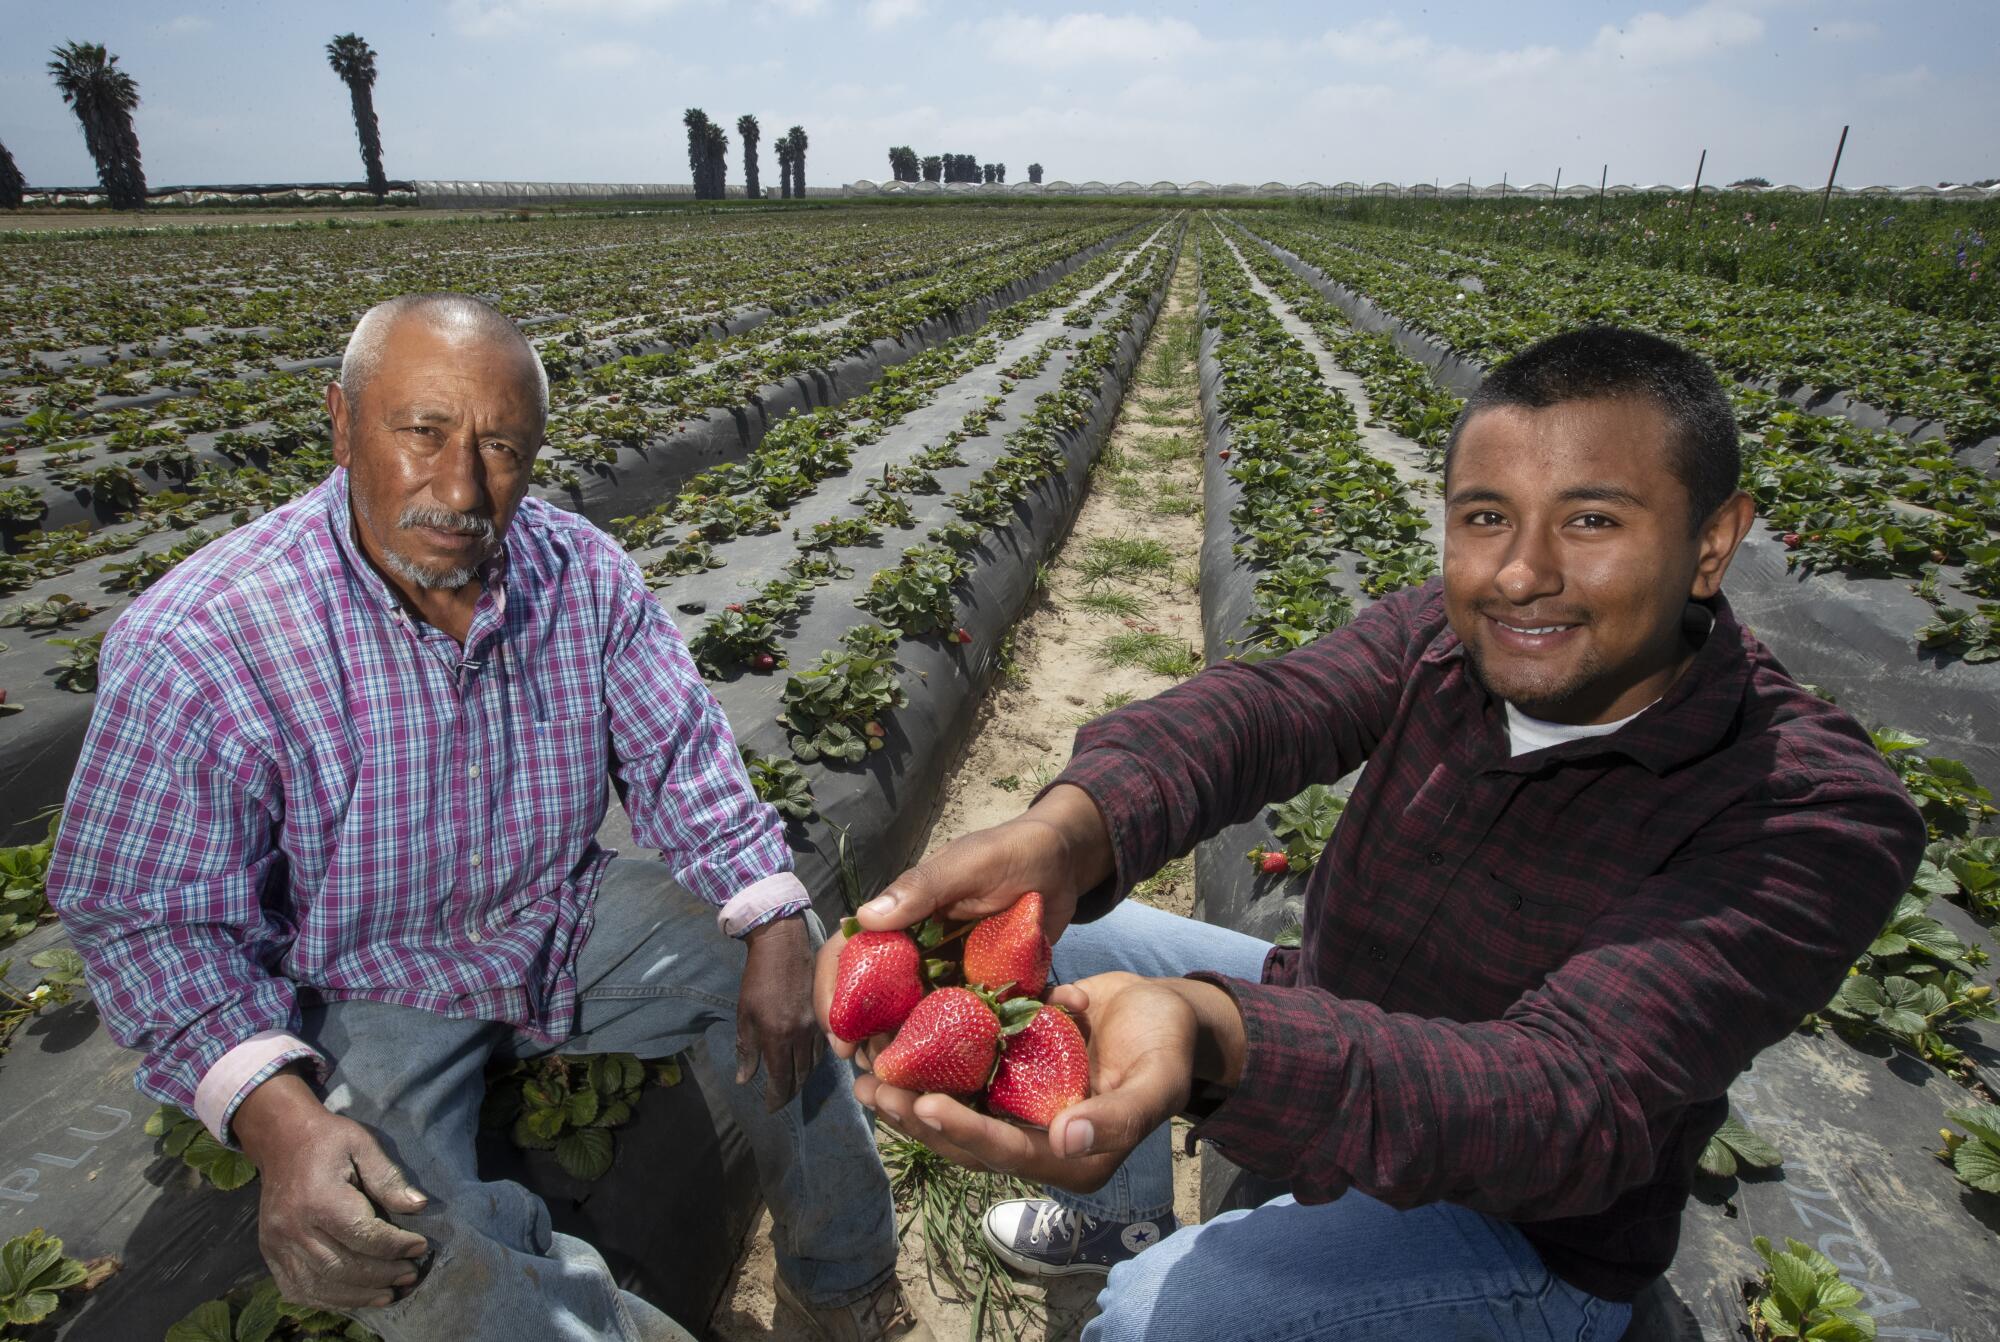  Javier Carranza, left, and his son, Flavio, display strawberries that the family has grown